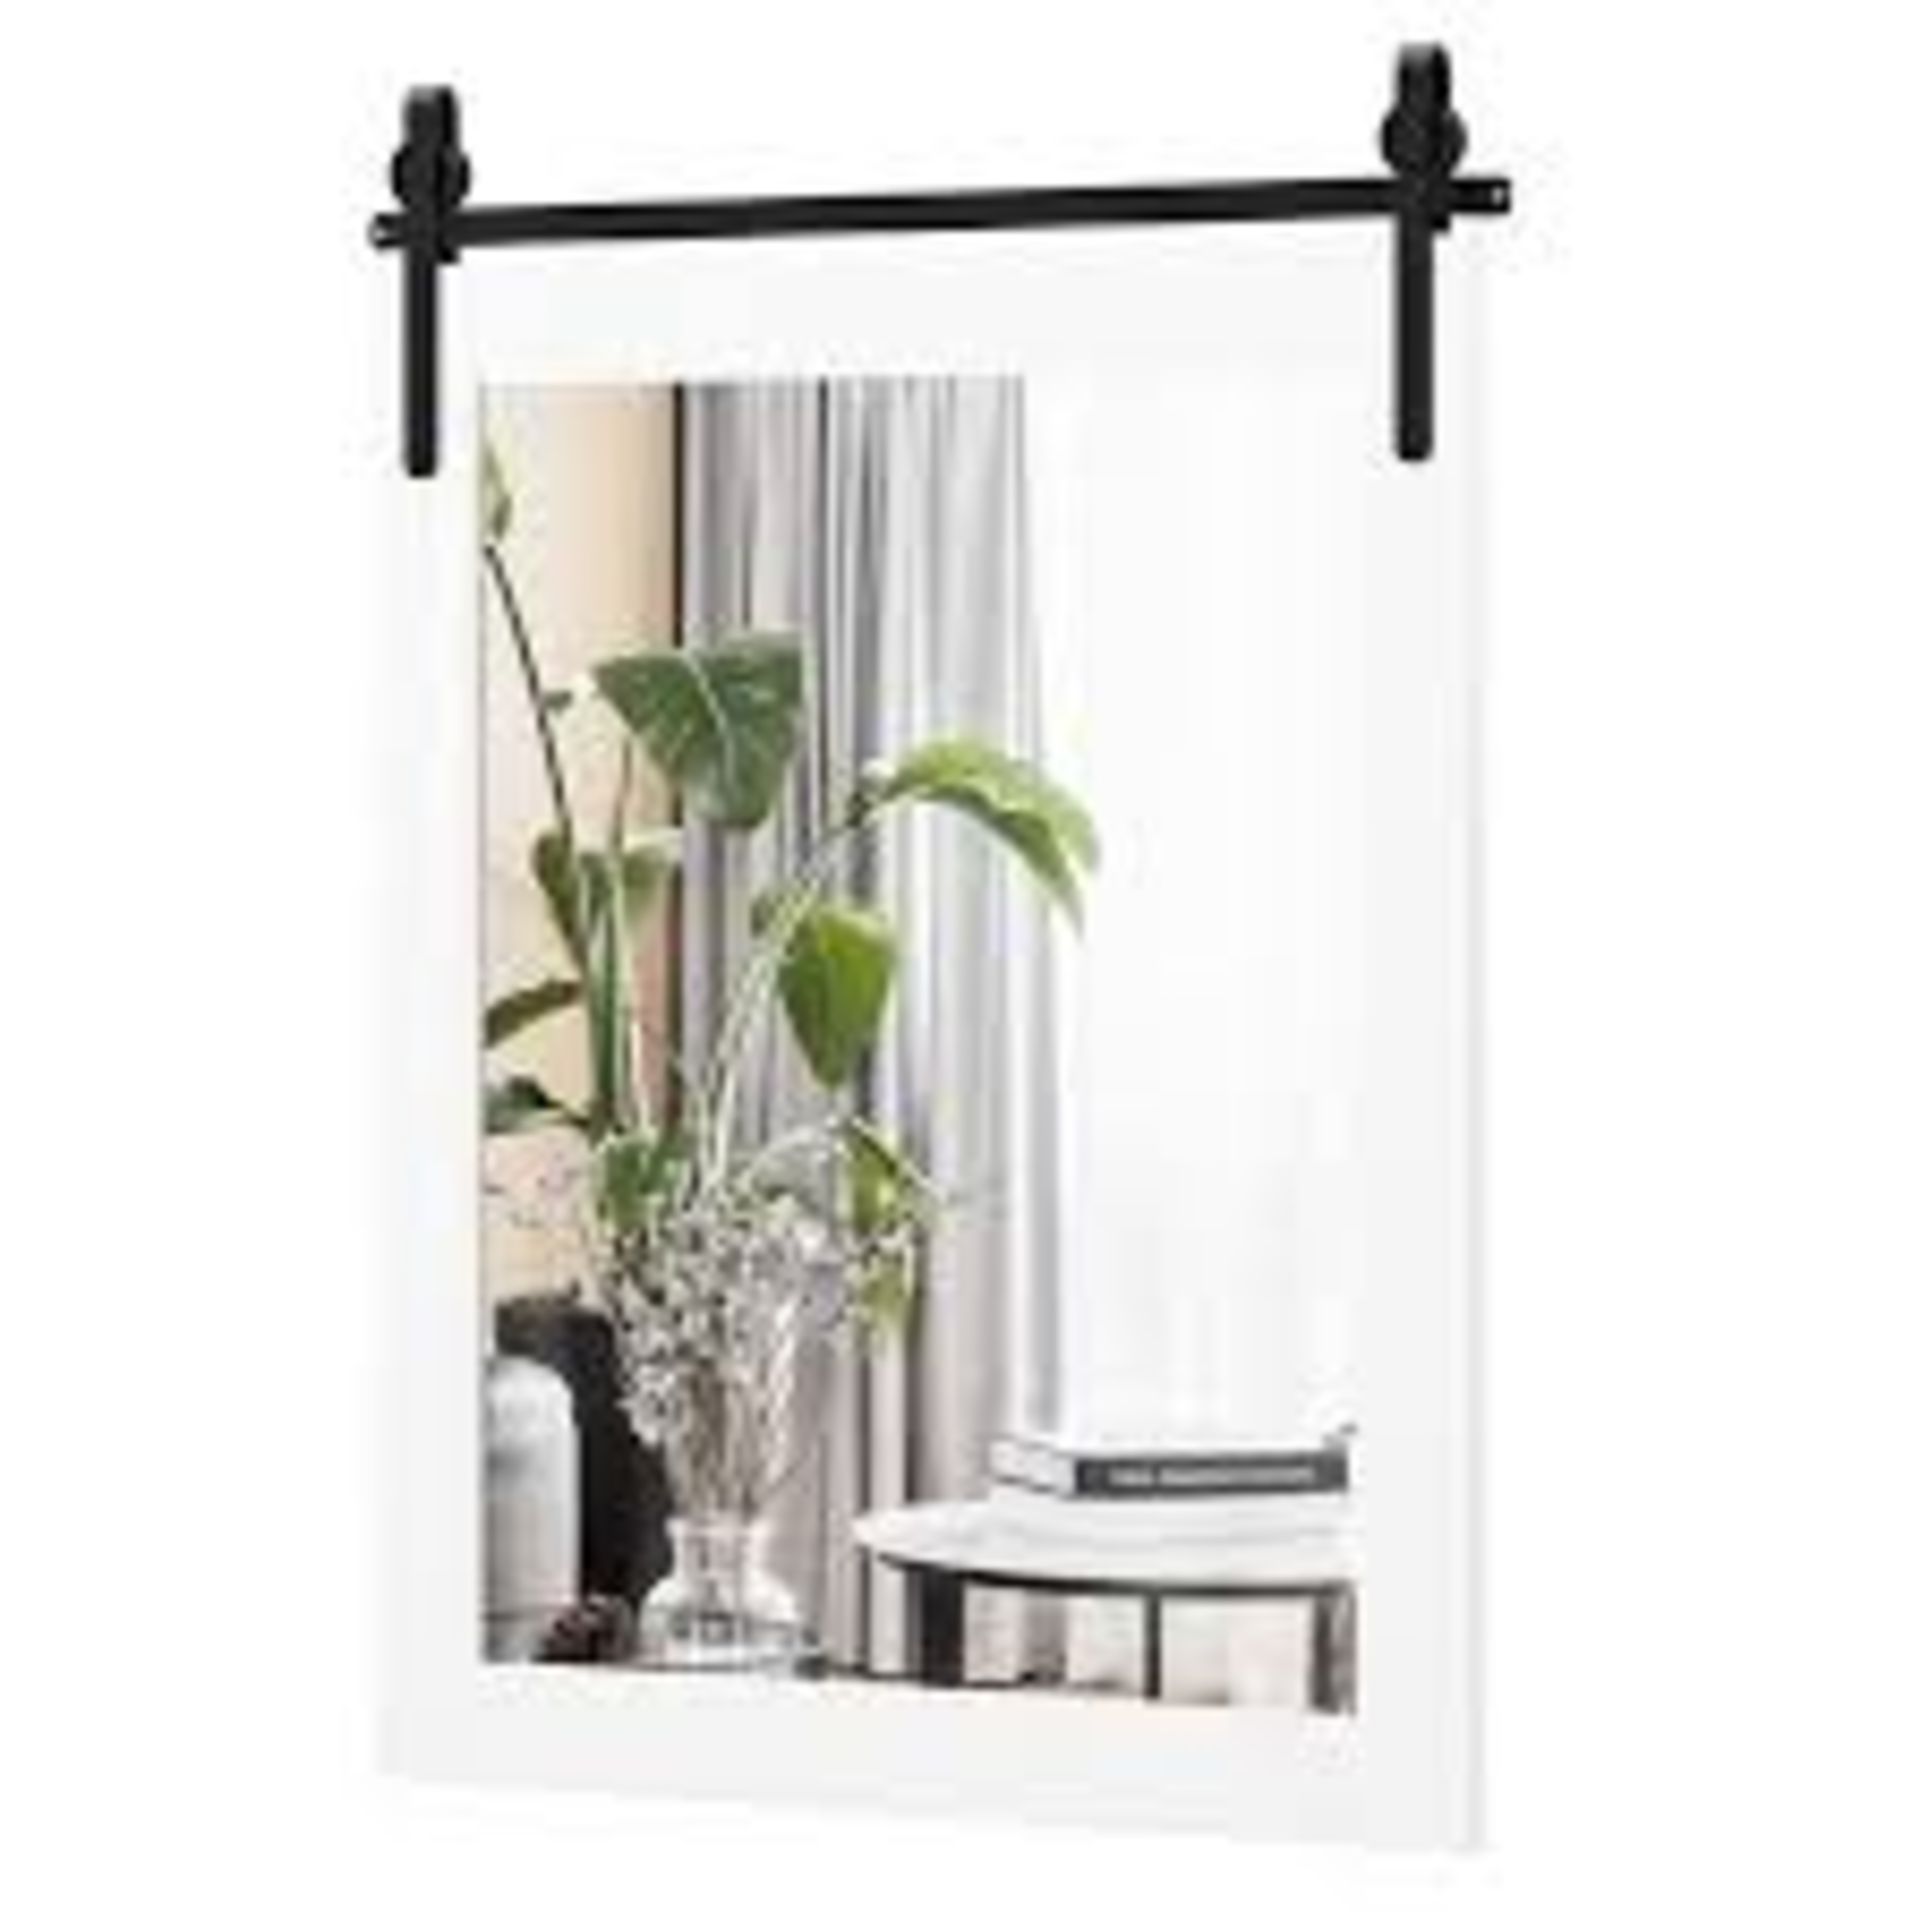 Costway 19458236 30 x 22 Inch Wall Mount Mirror with Wood Frame. - R13a.3.